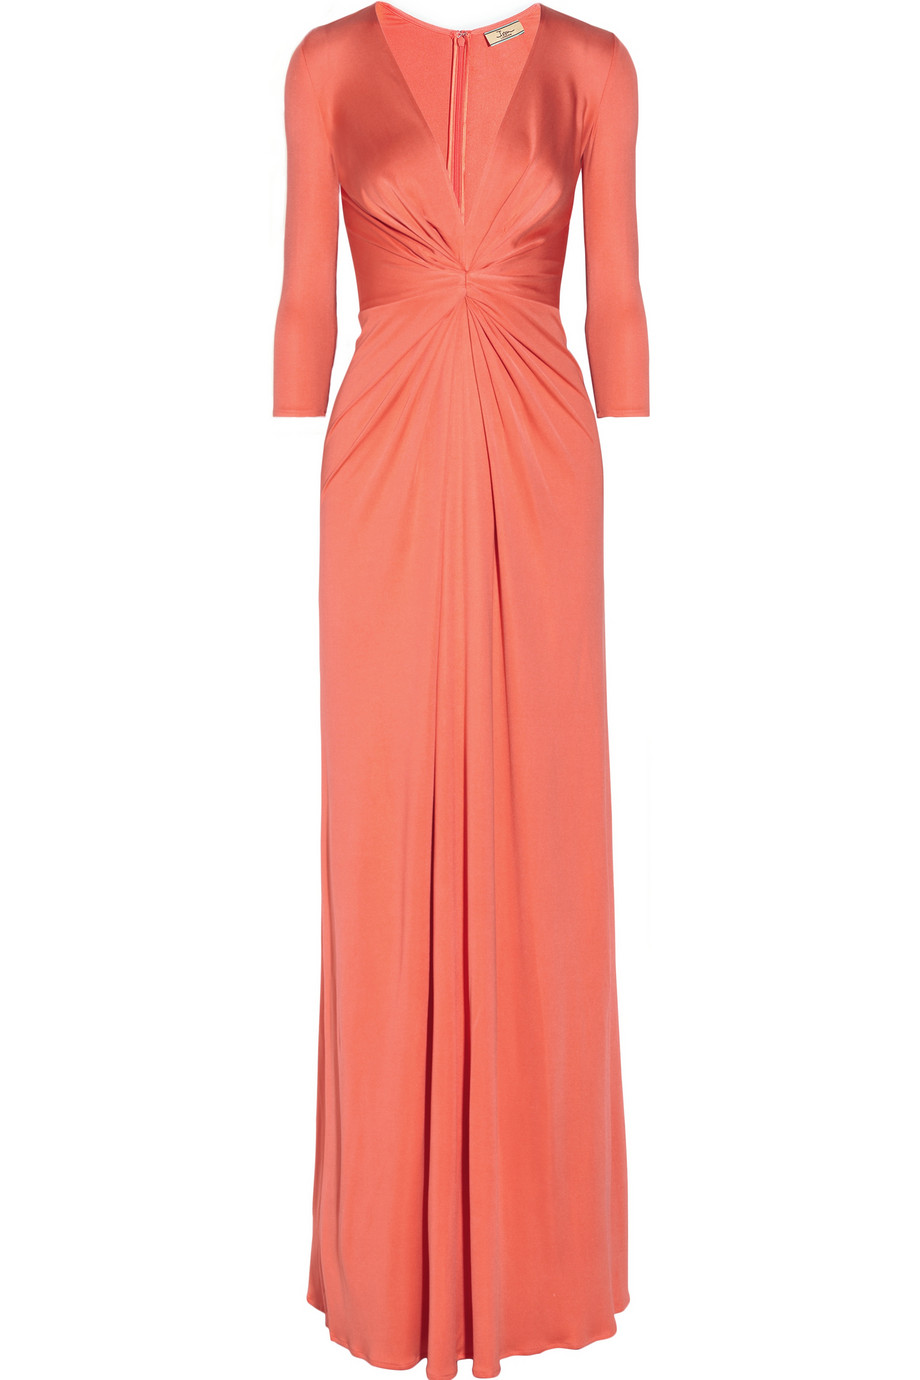 Issa Silk jersey Maxi Dress in Pink (Coral) | Lyst